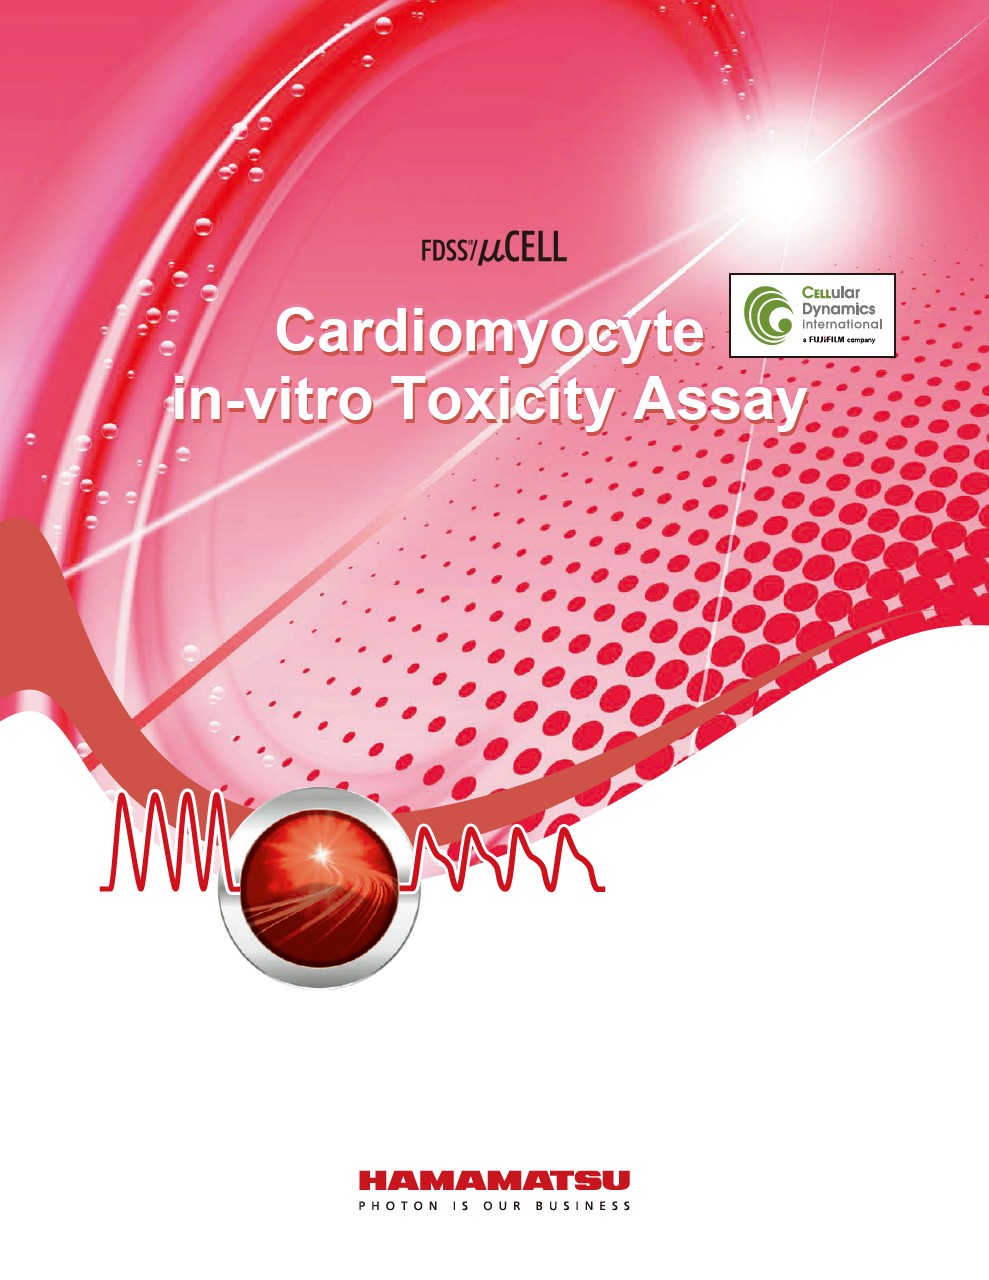 FDSS/μCELL Cardiomyocyte in-vitro Toxicity Assay [CDI ver.]